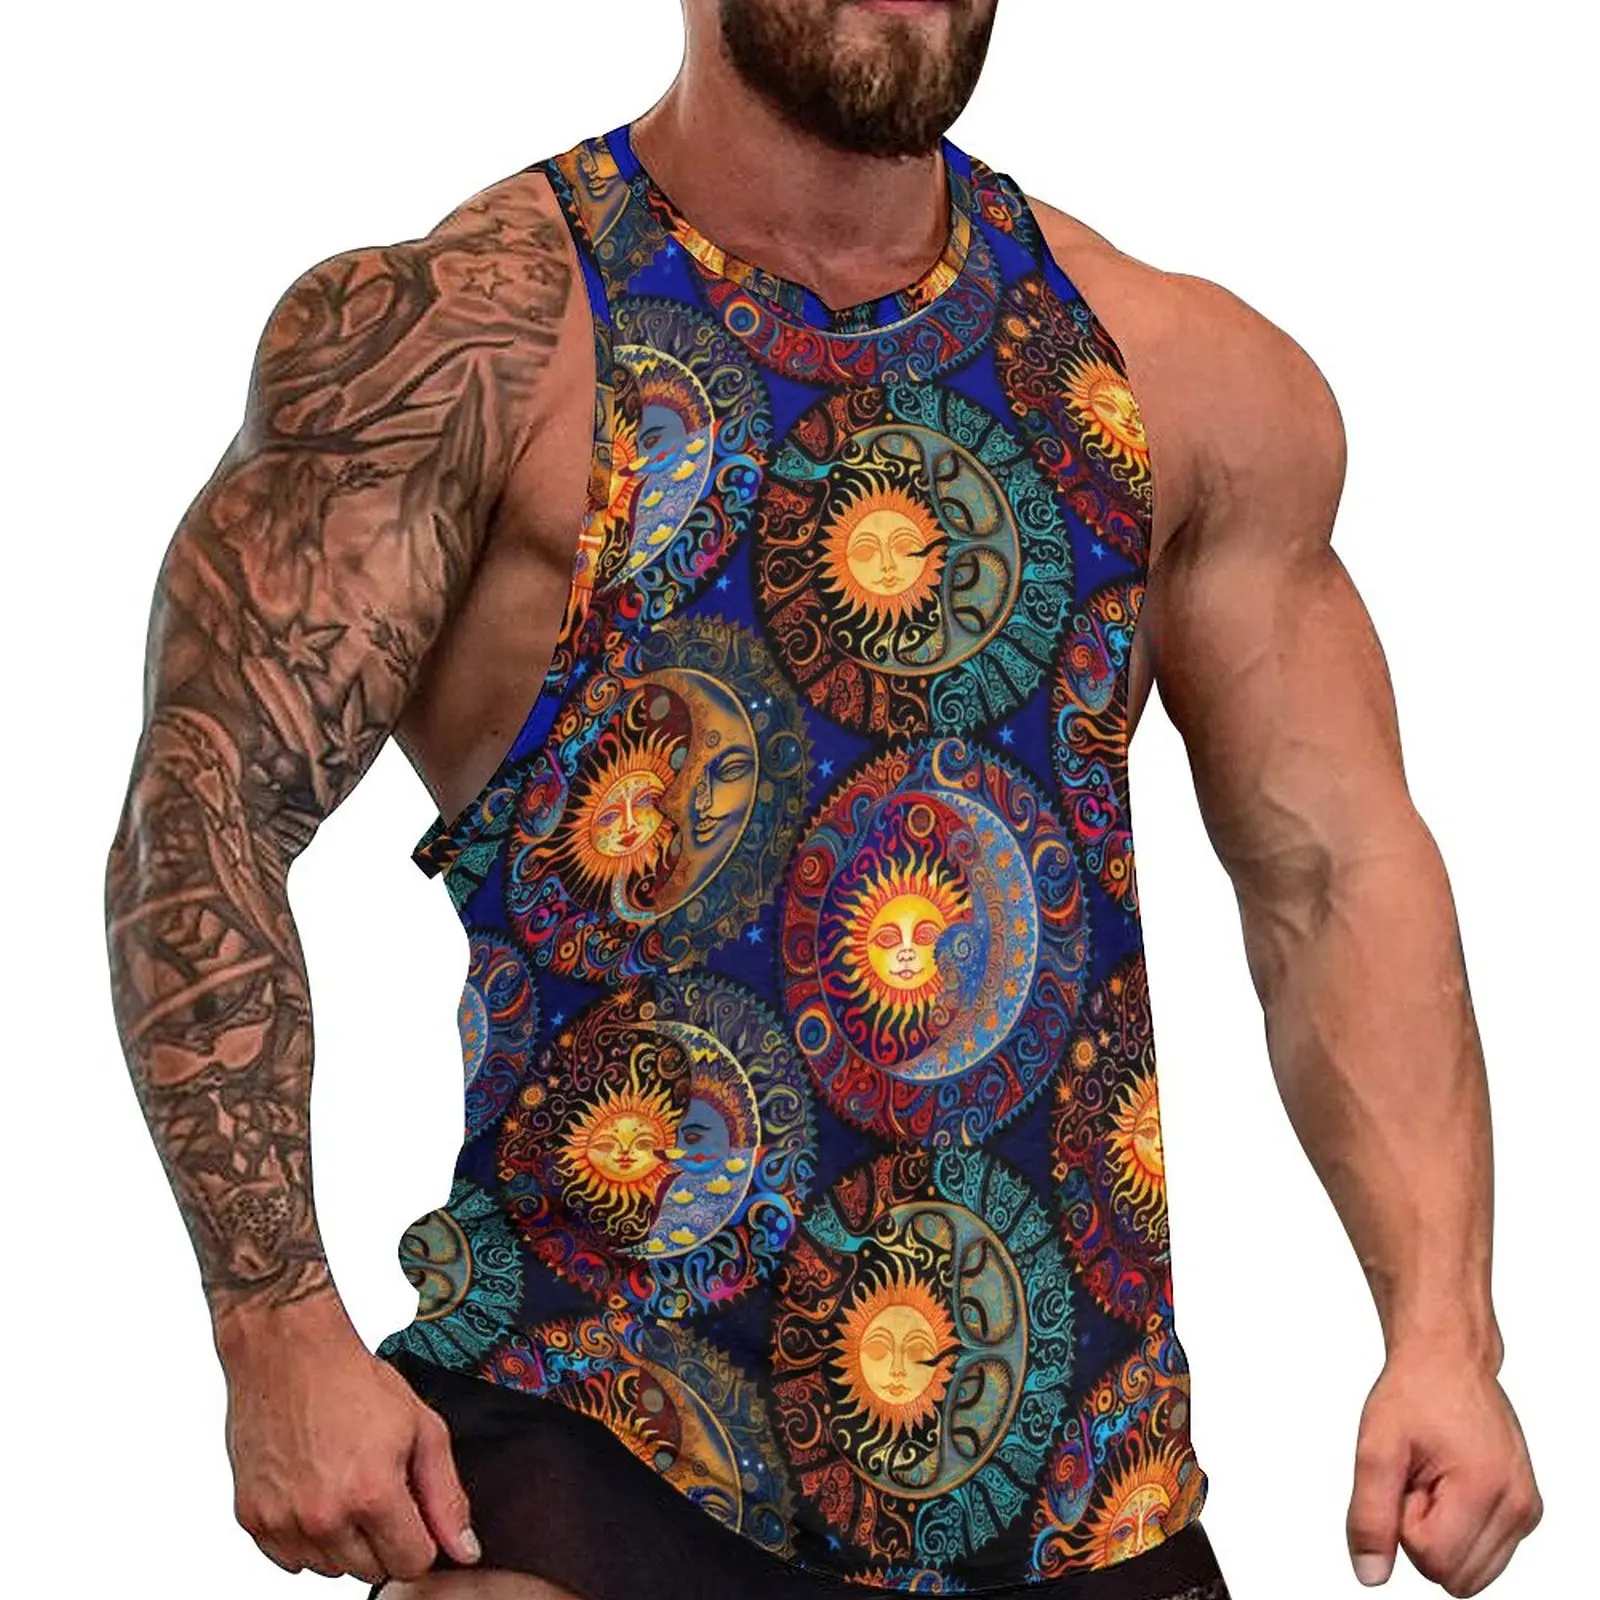 

Psychedelic Sun And Moon Tank Top Cosmic Dream Vintage Tops Beach Training Mens Pattern Sleeveless Vests Large Size 4XL 5XL